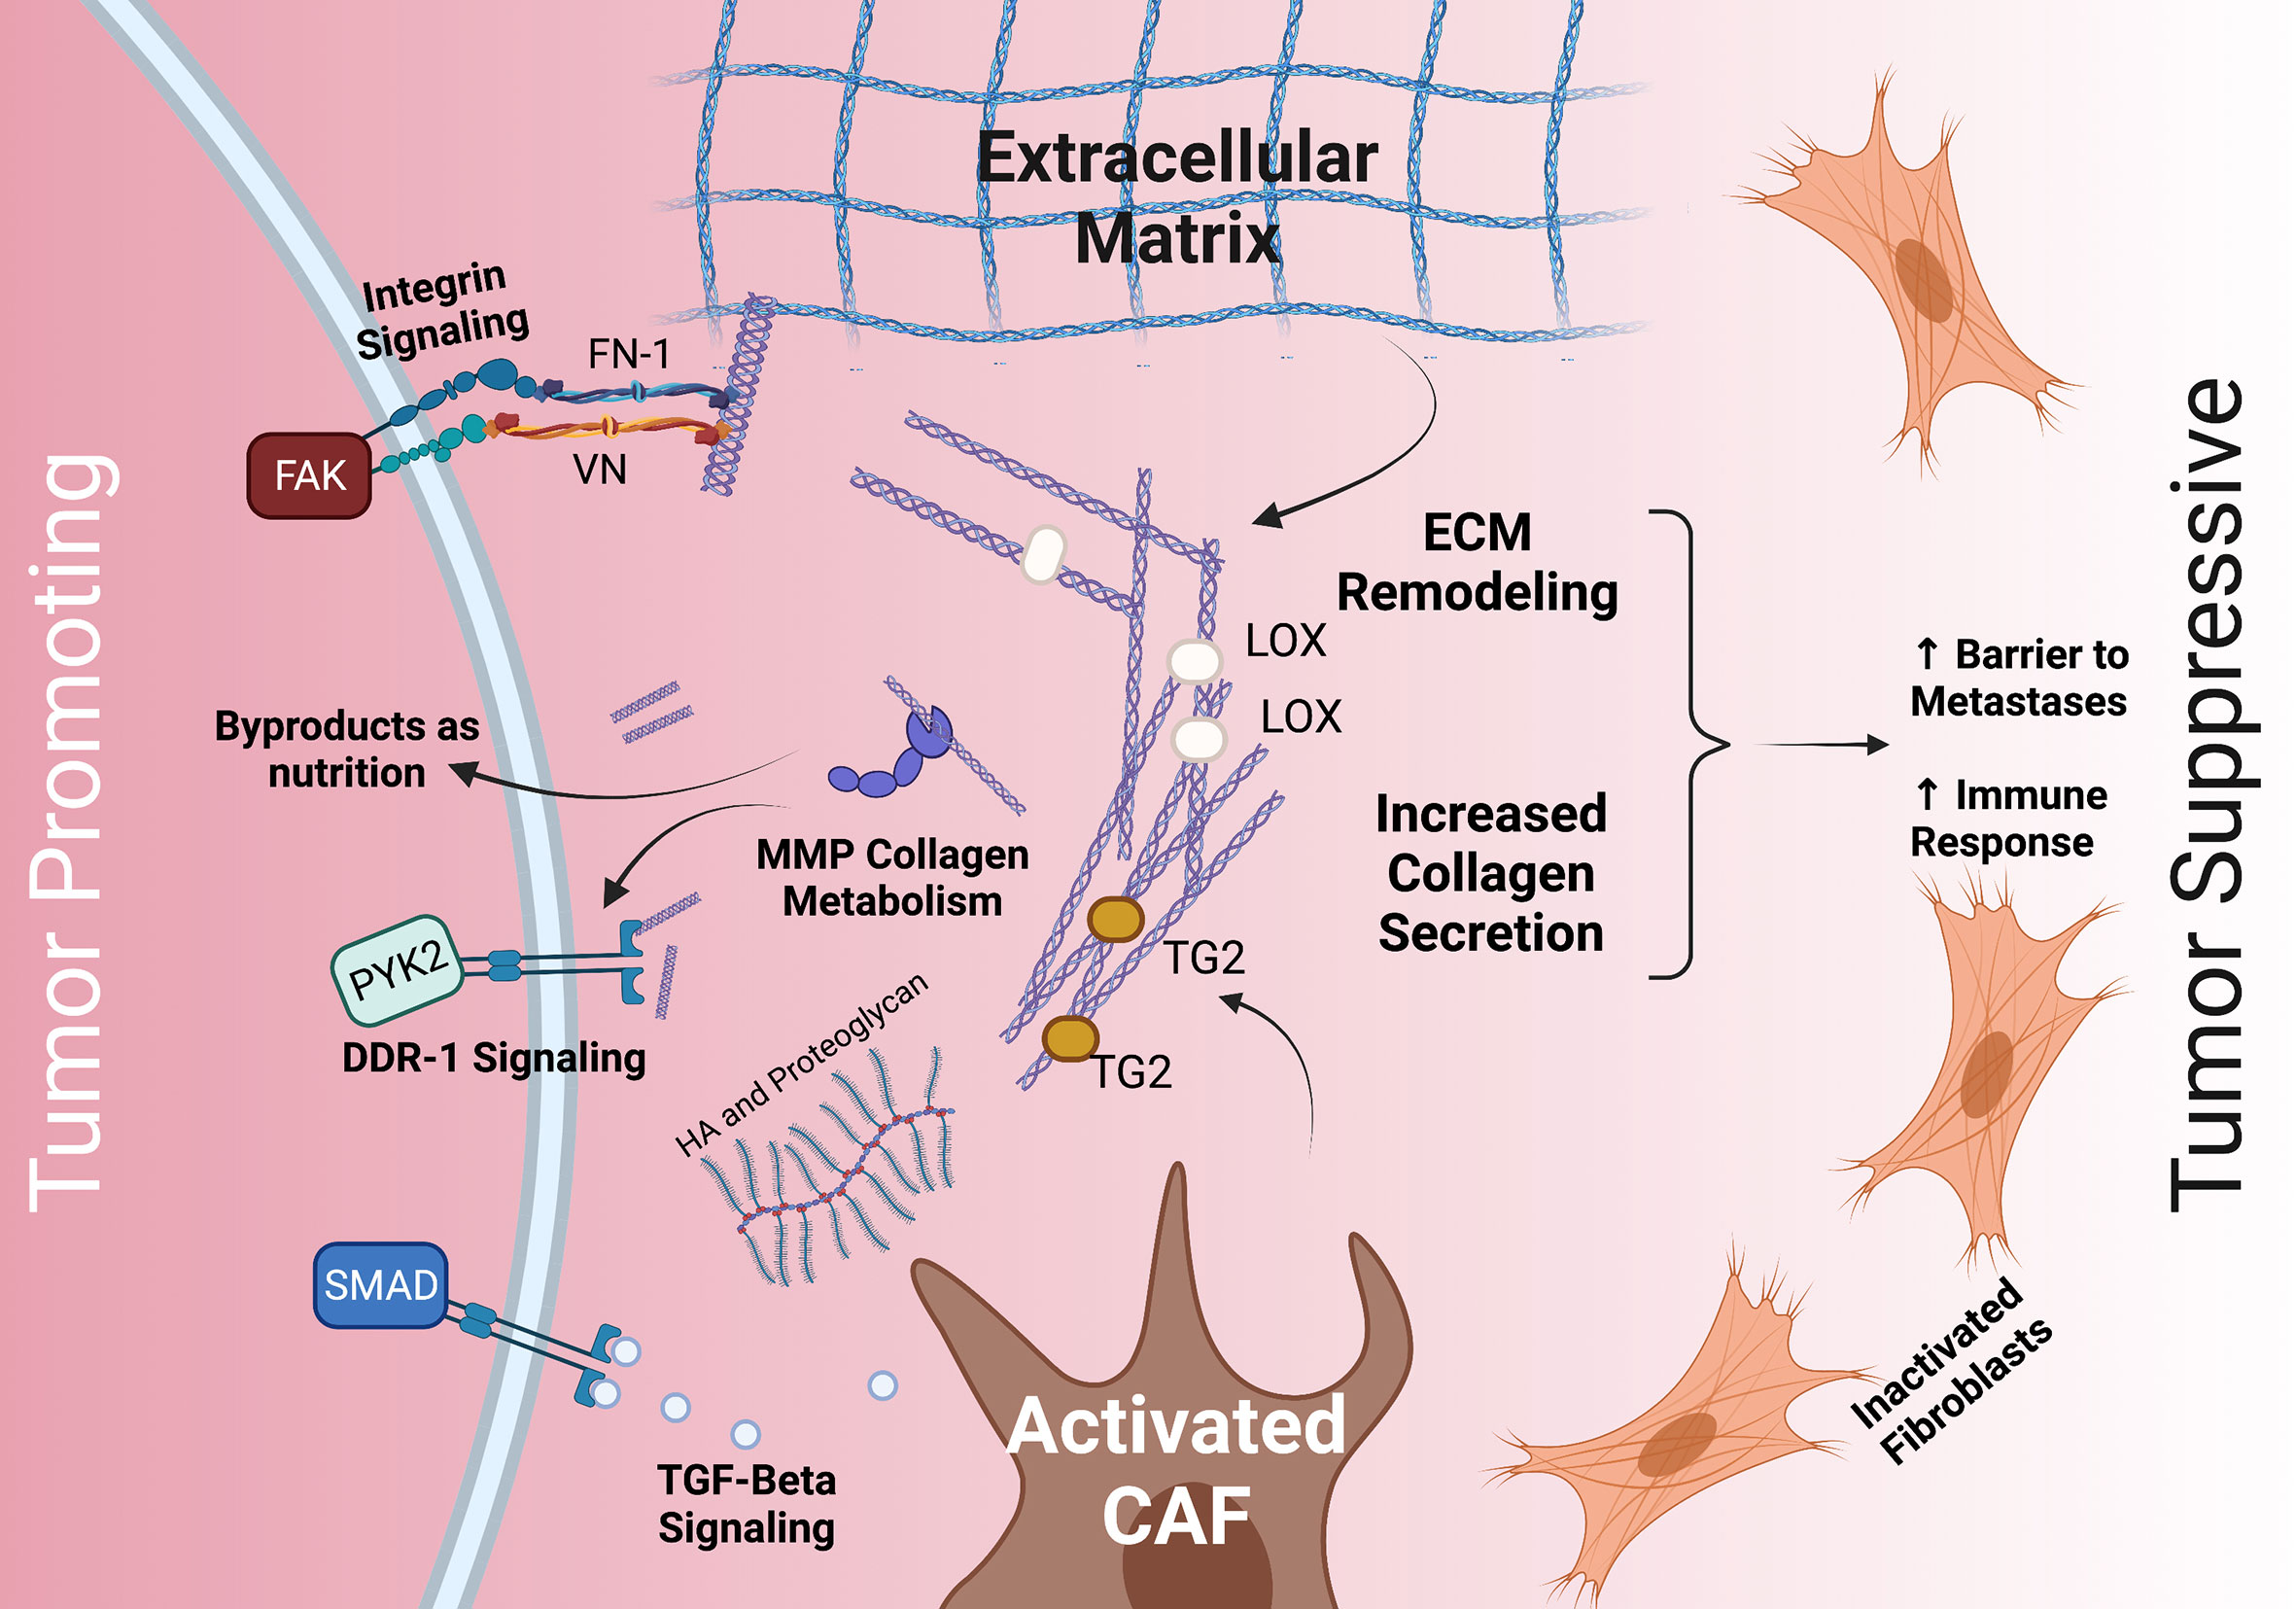 Frontiers The Pdac Extracellular Matrix A Review Of The Ecm Protein